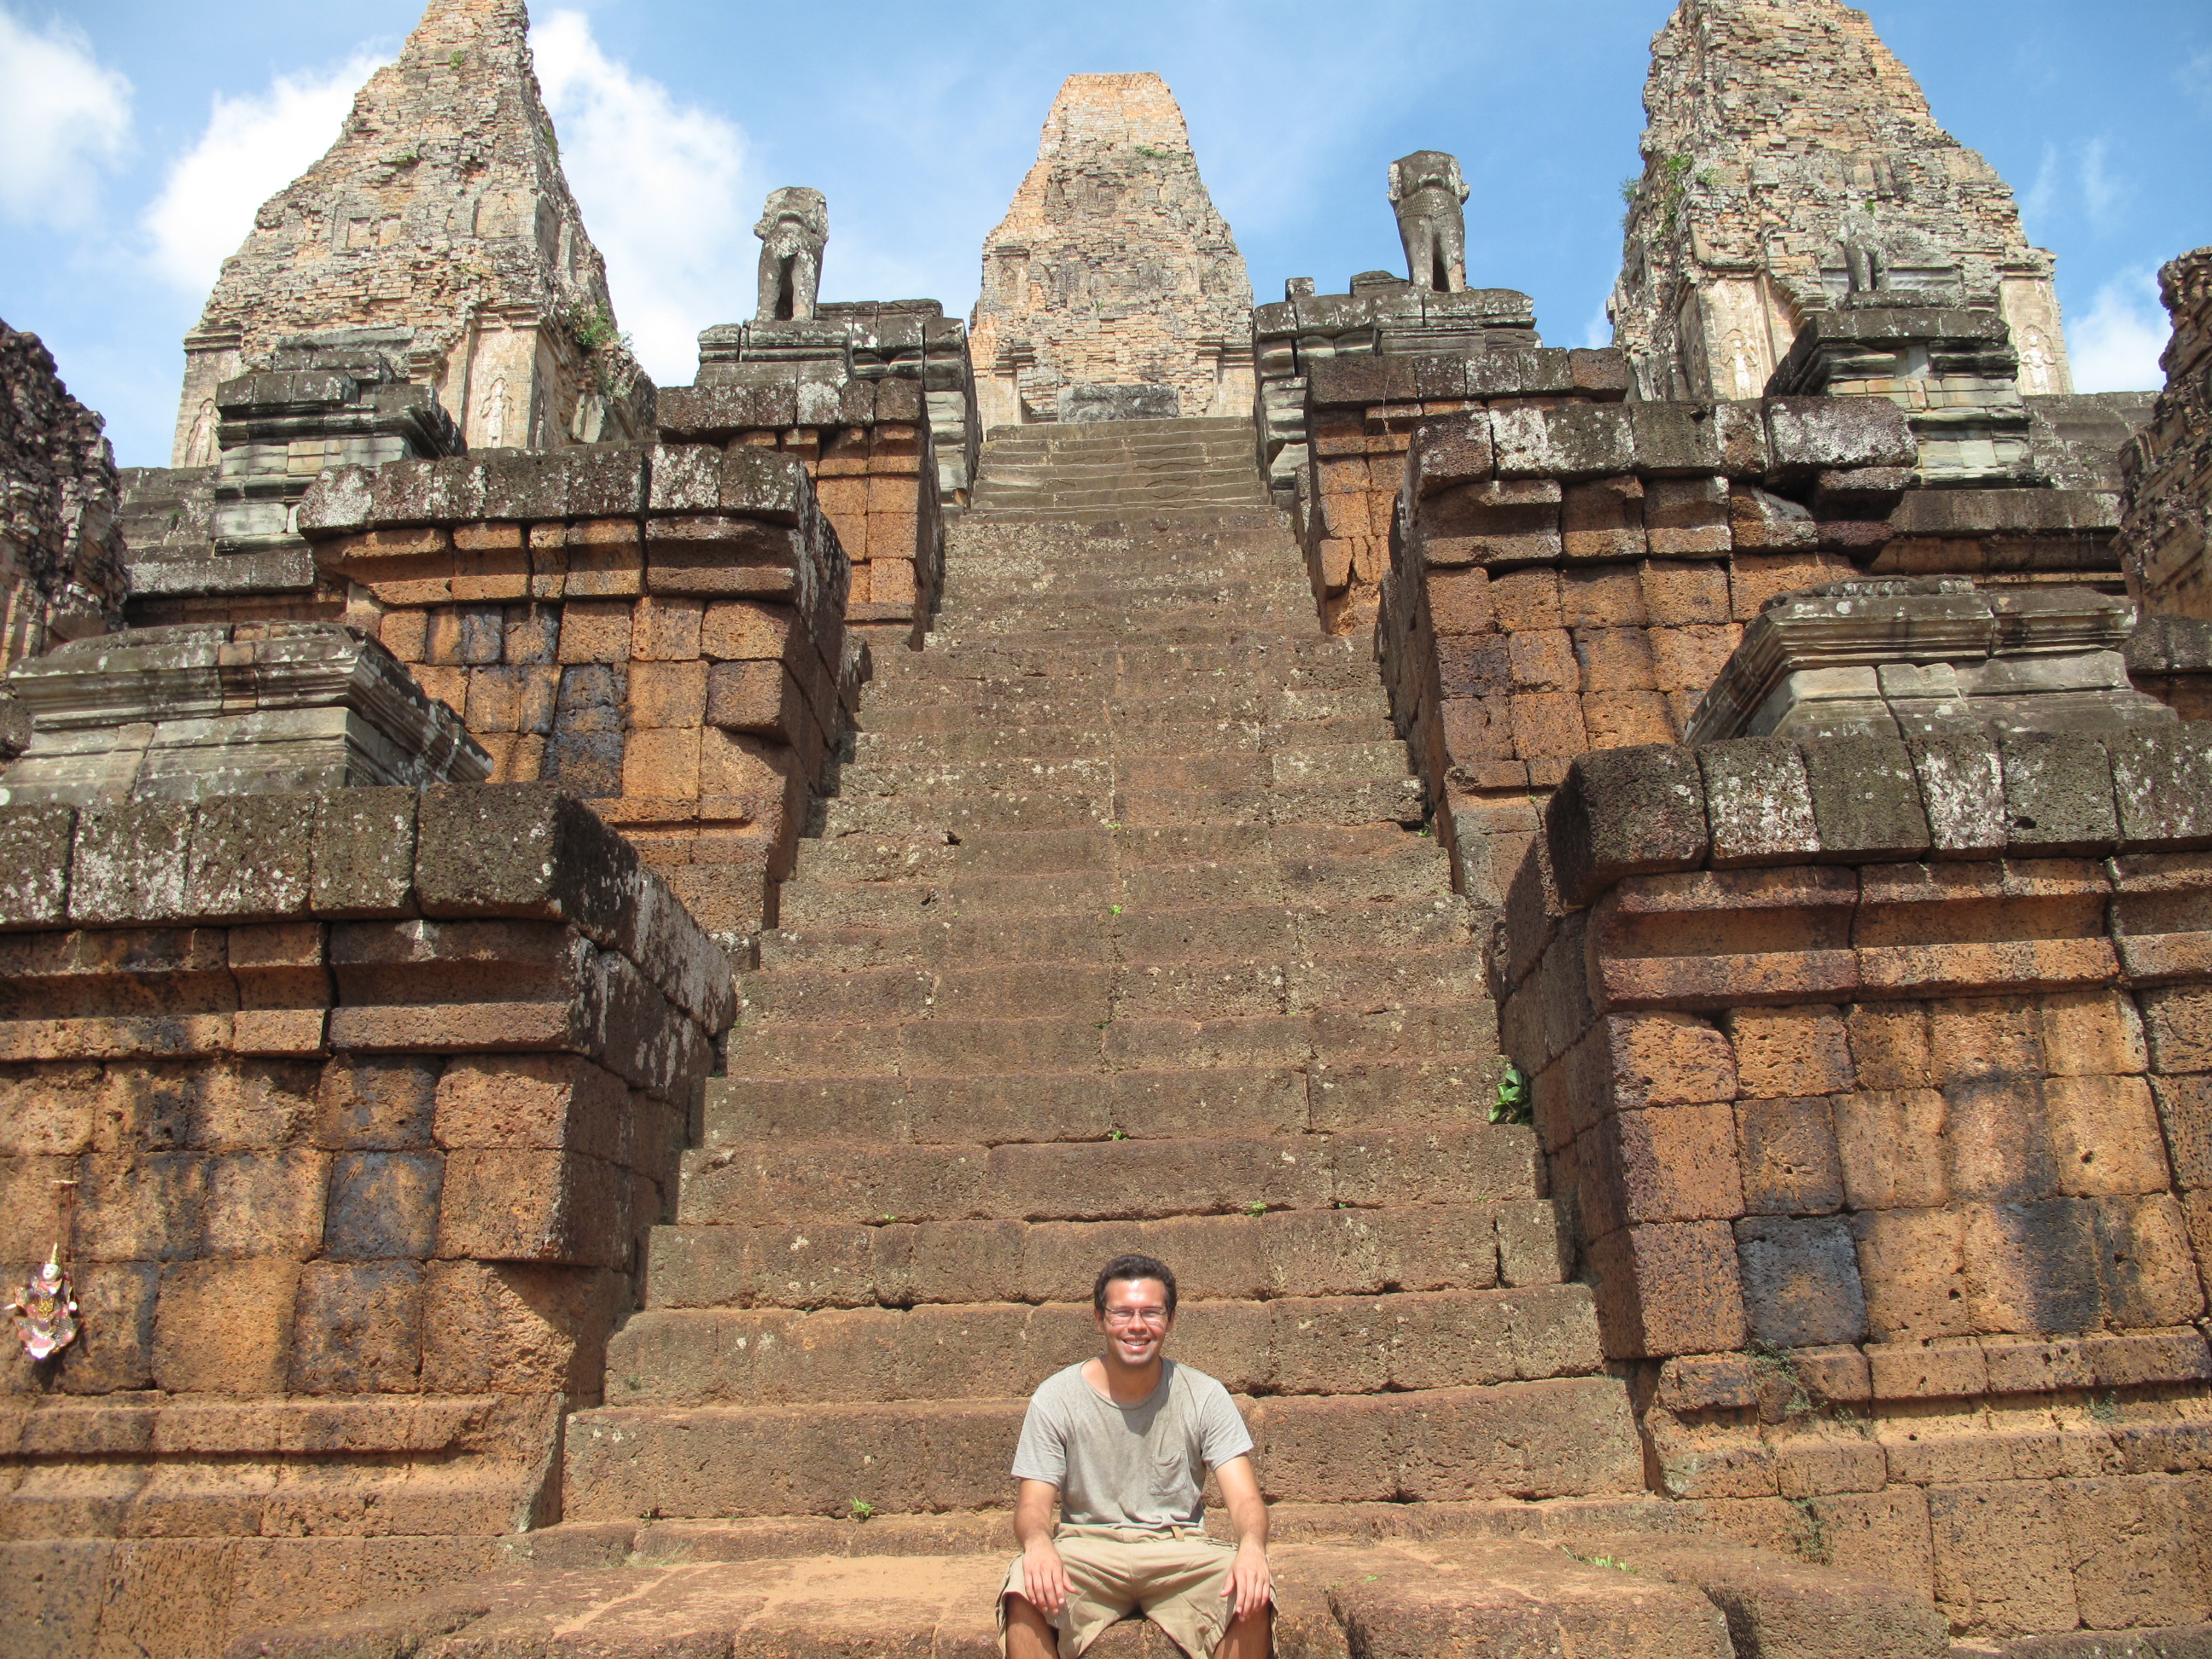 This is a picture of me sitting on a temple in Cambodia.